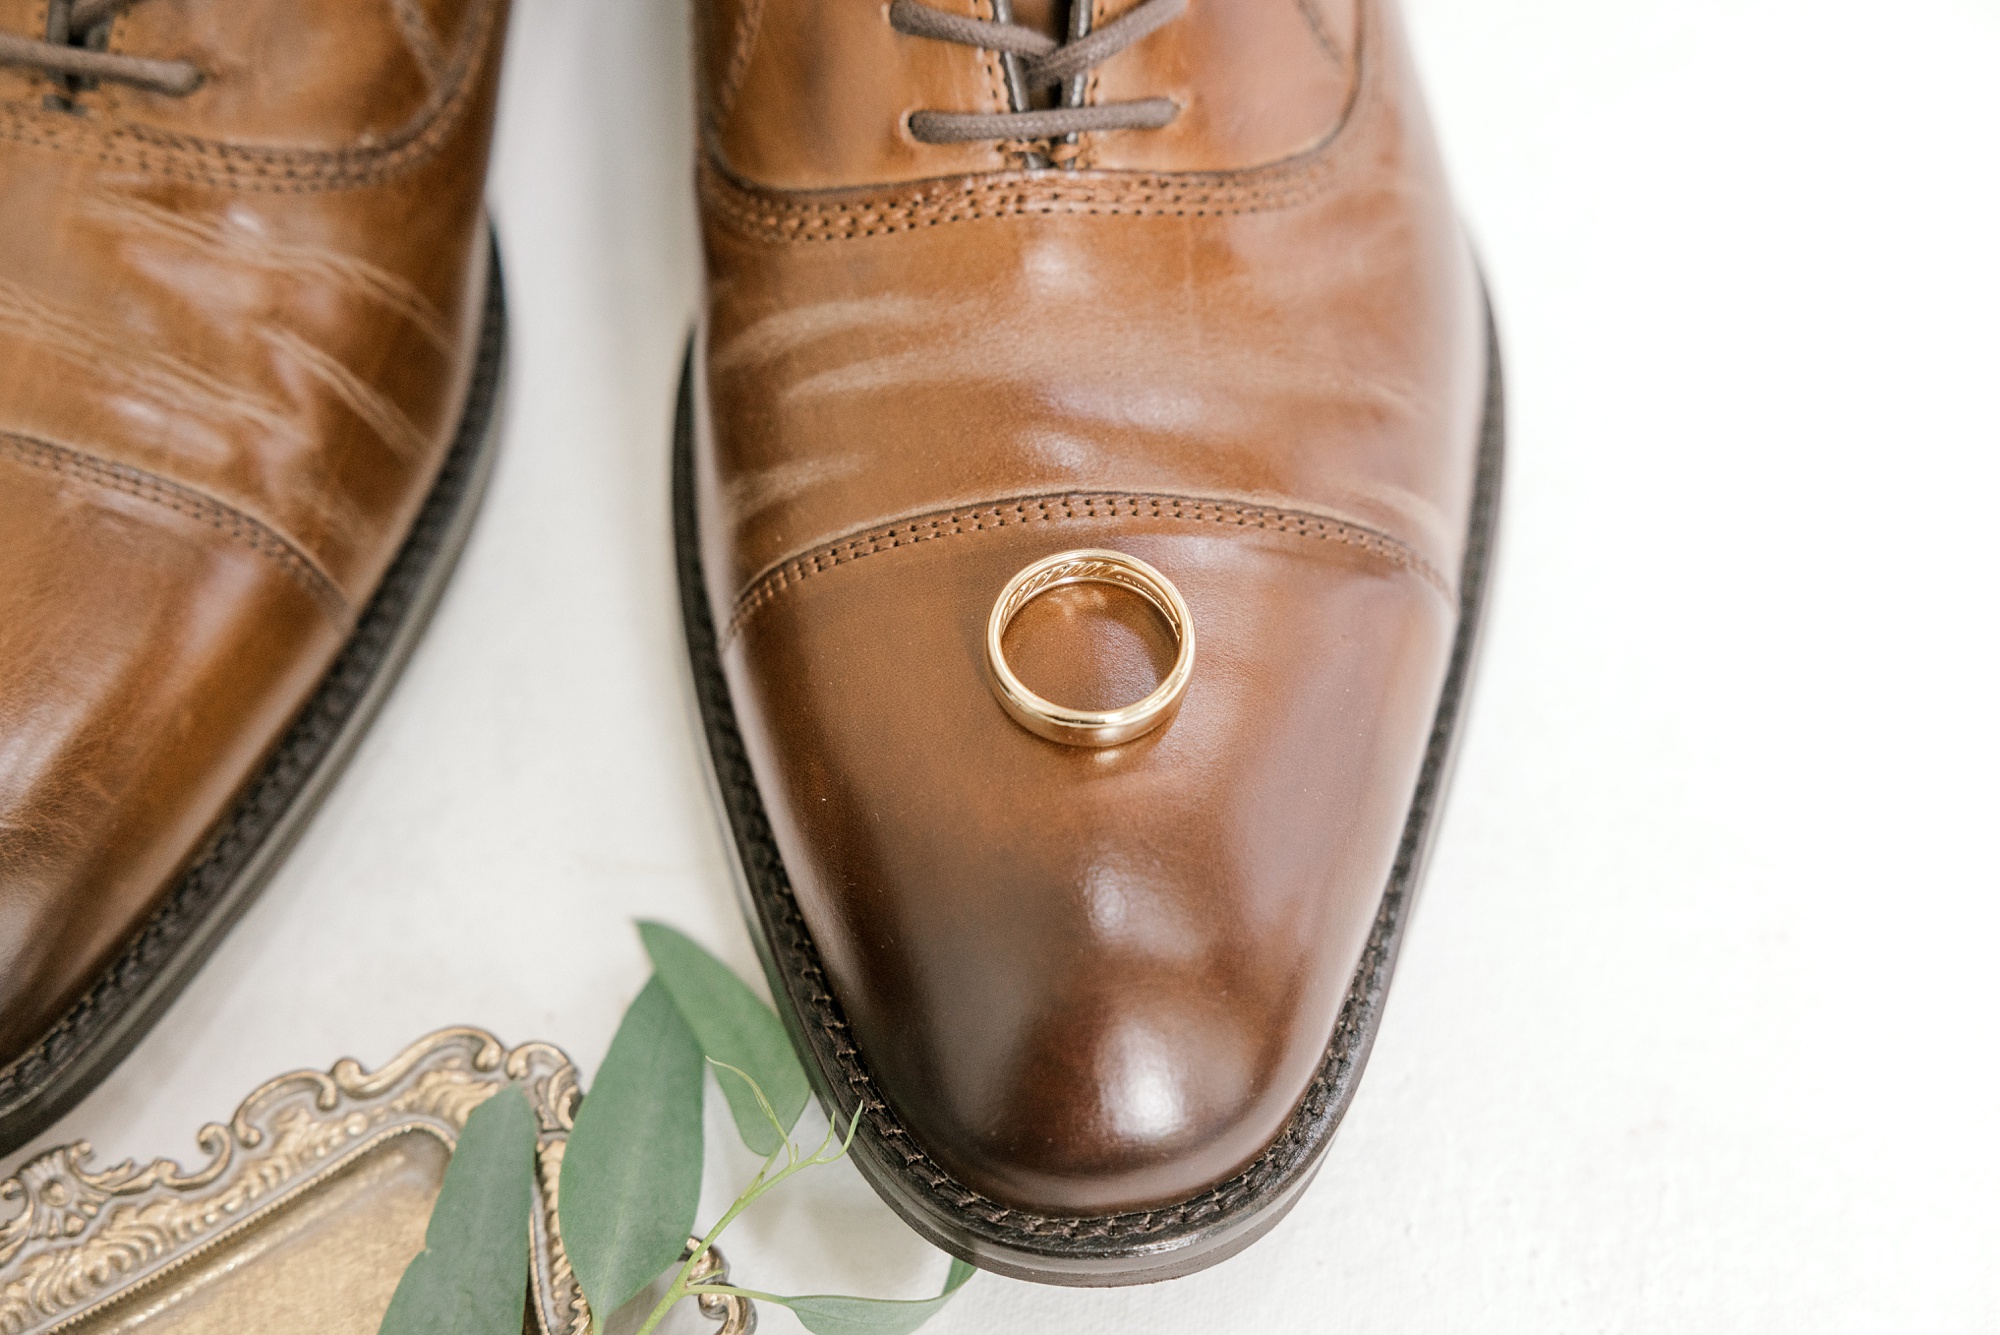 gold wedding band rests on groom's brown shoes for NJ wedding